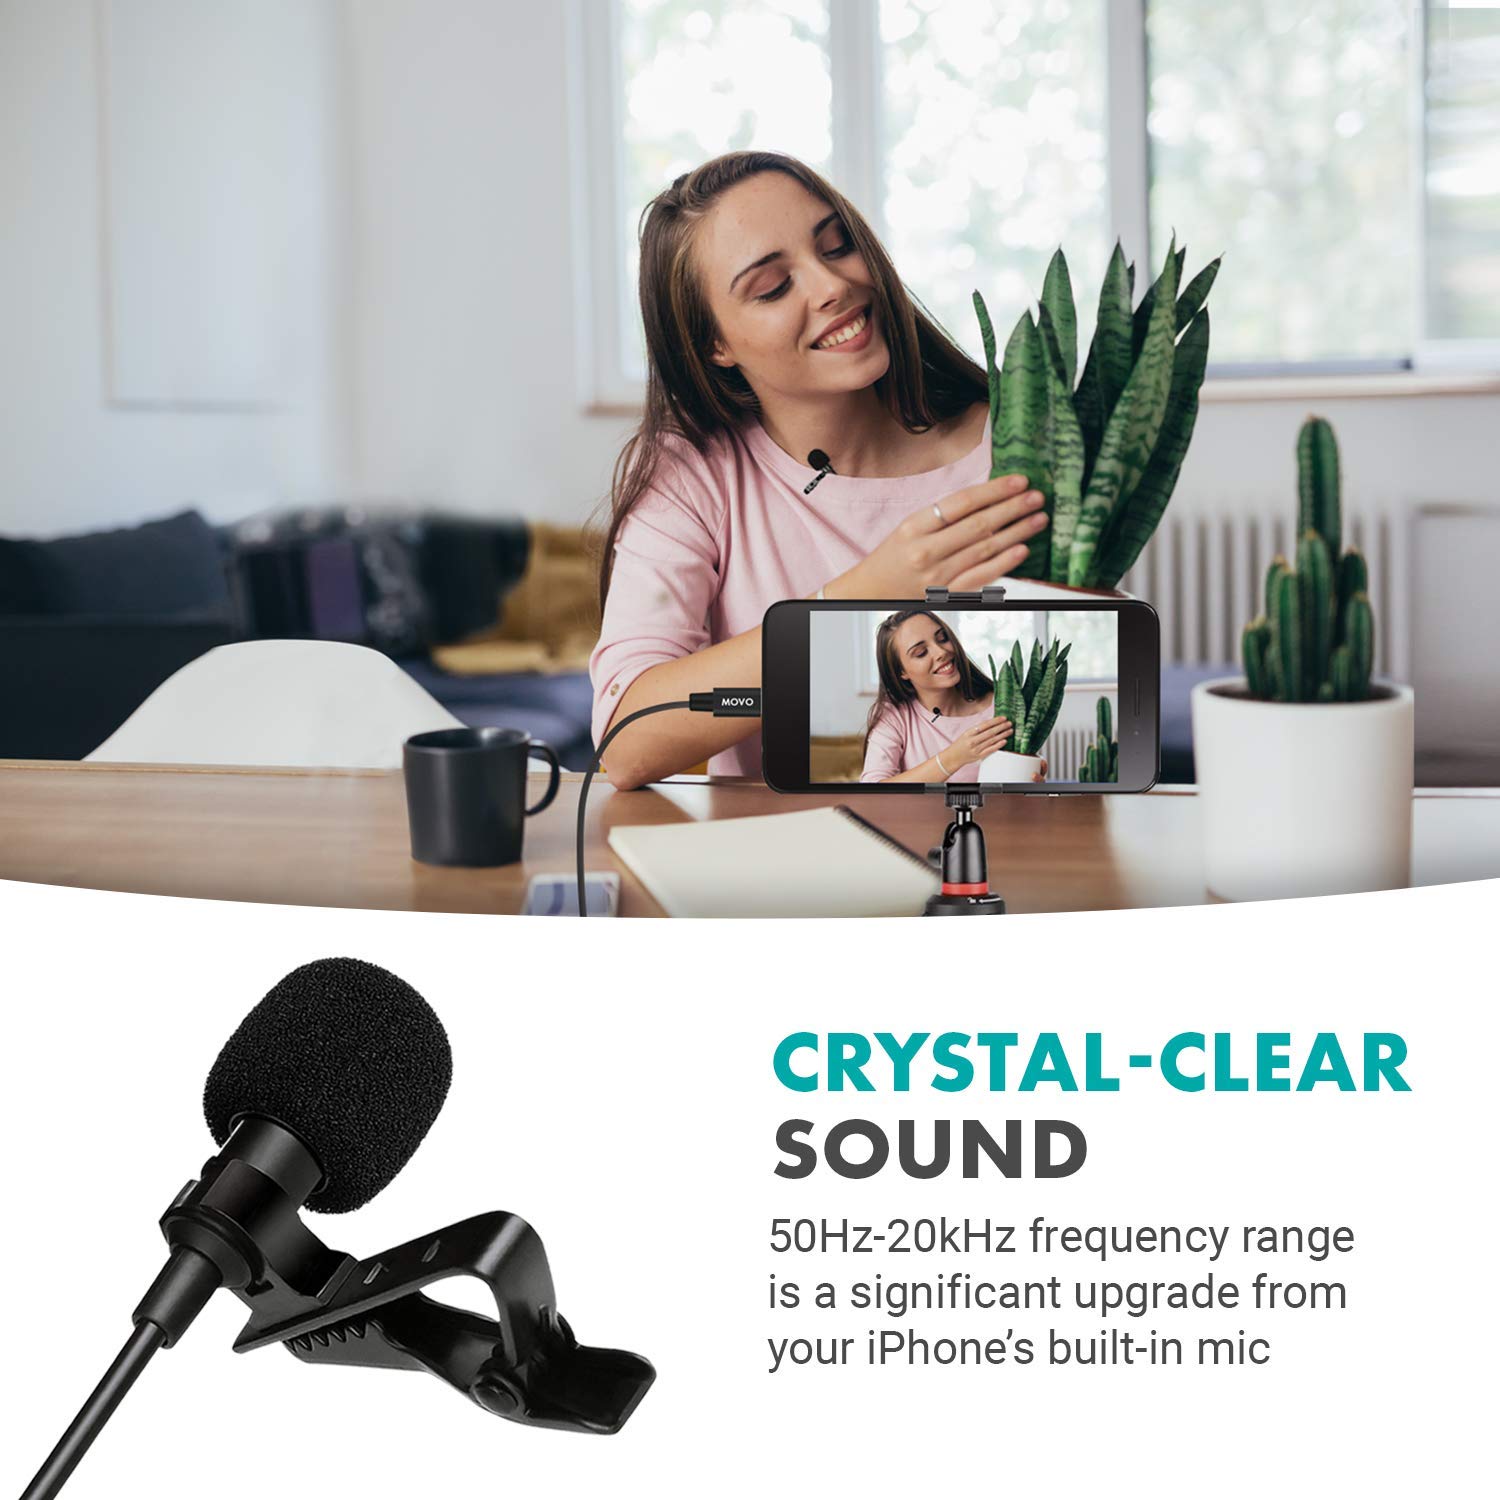 Movo iLav-L Digital Lavalier Omnidirectional Clip on Microphone with MFi Certified Lightning Connector Compatible with iPhone, iPad, iPod, iOS Smartphones and Tablets (20-Foot Cord)  - Very Good